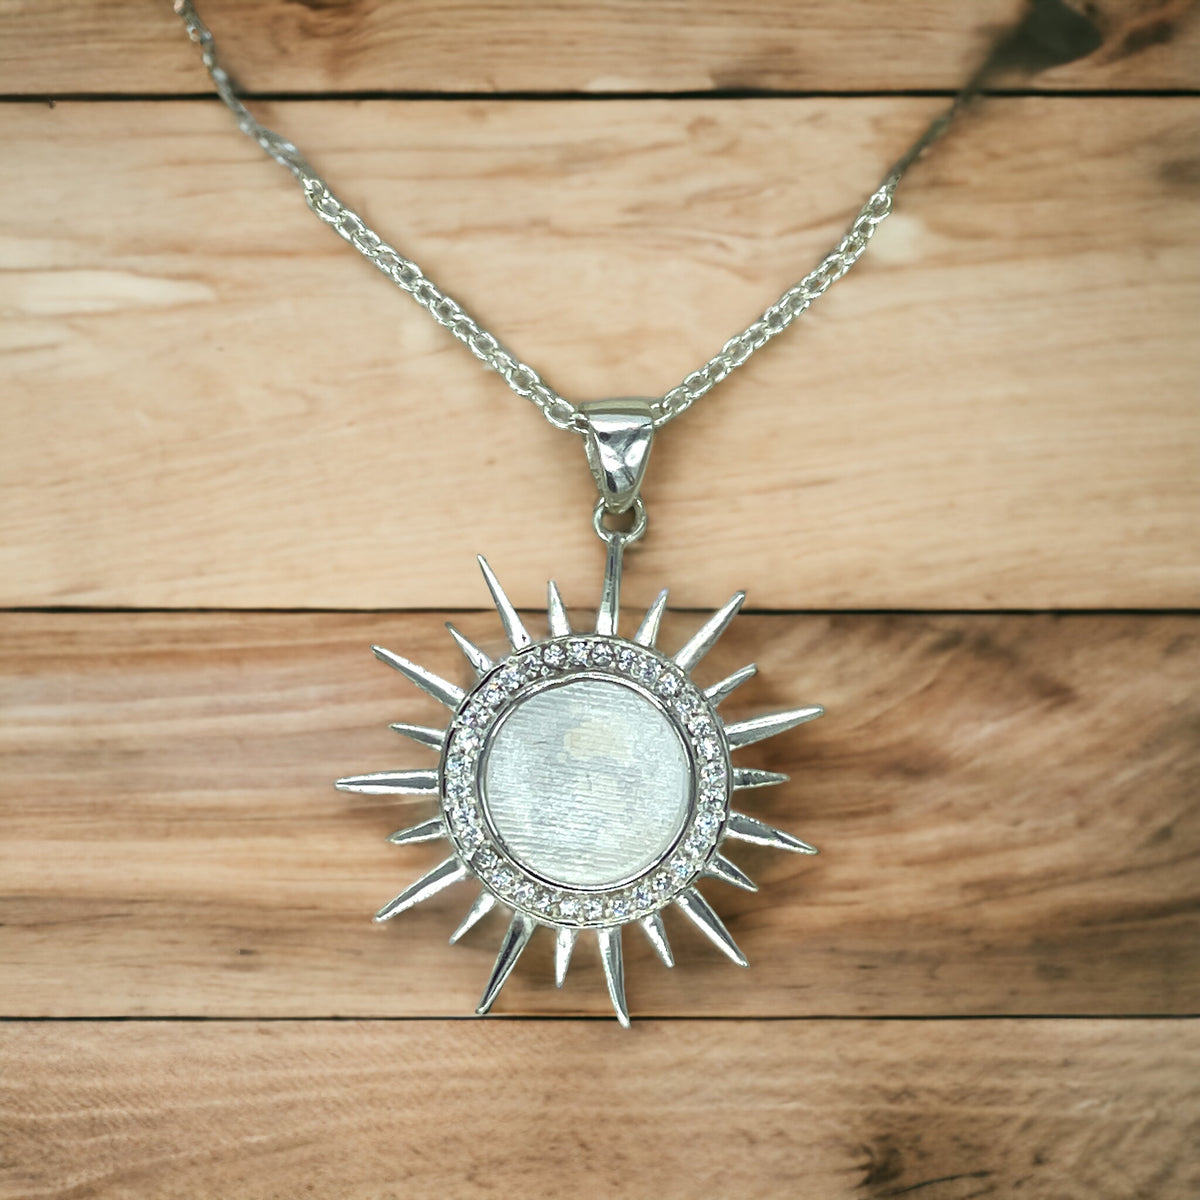 Spiked Sun 925 Sterling Silver Bezel Blank With Chain Keepsake For UV and Epoxy Resin with FREE gift box